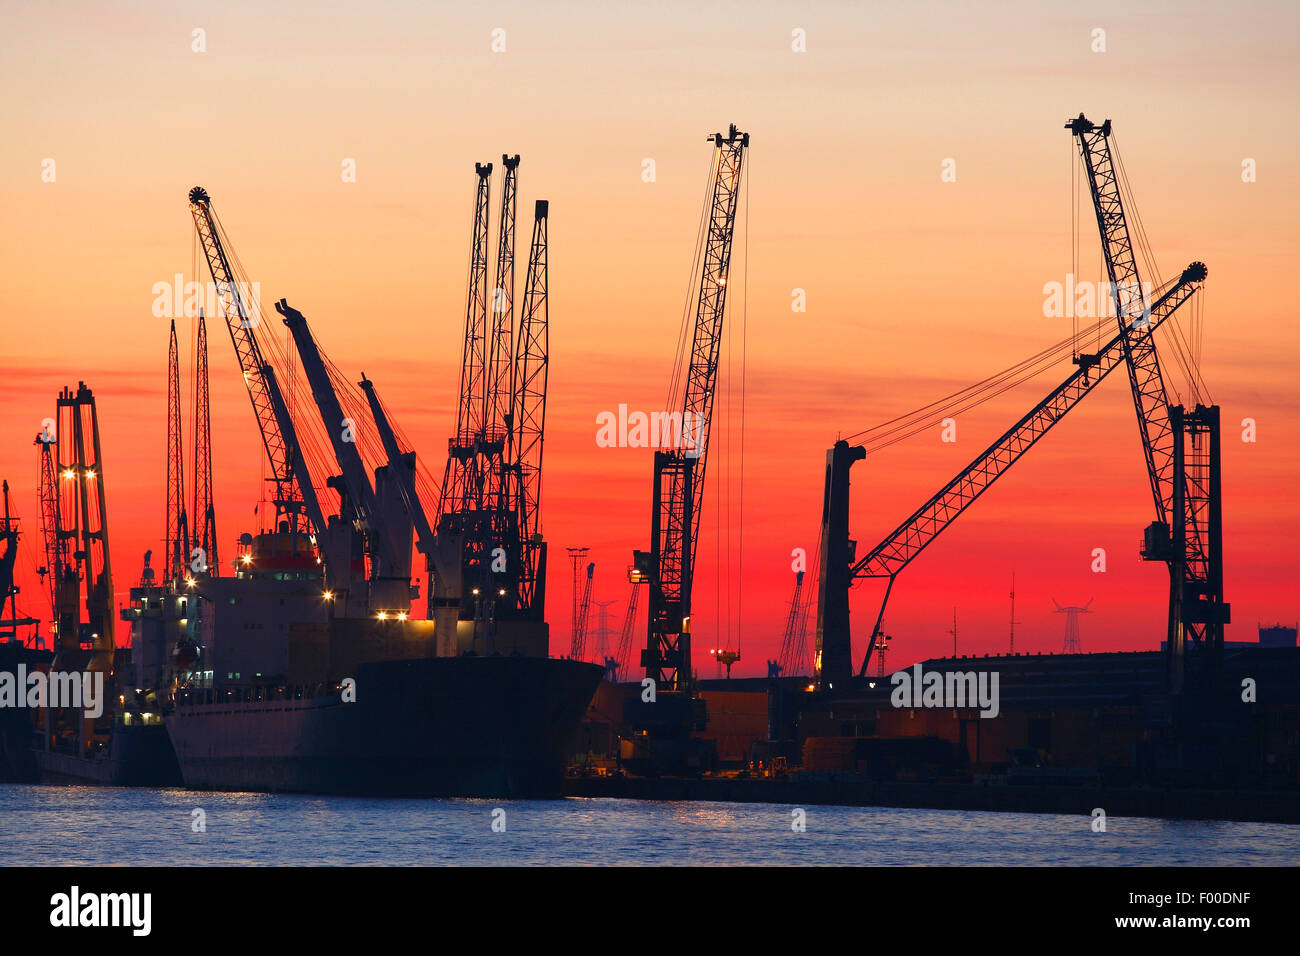 Ships in dock at oil refinery from the petrochemical industry of the Antwerp harbour at sunset, Belgium, Antwerp Stock Photo